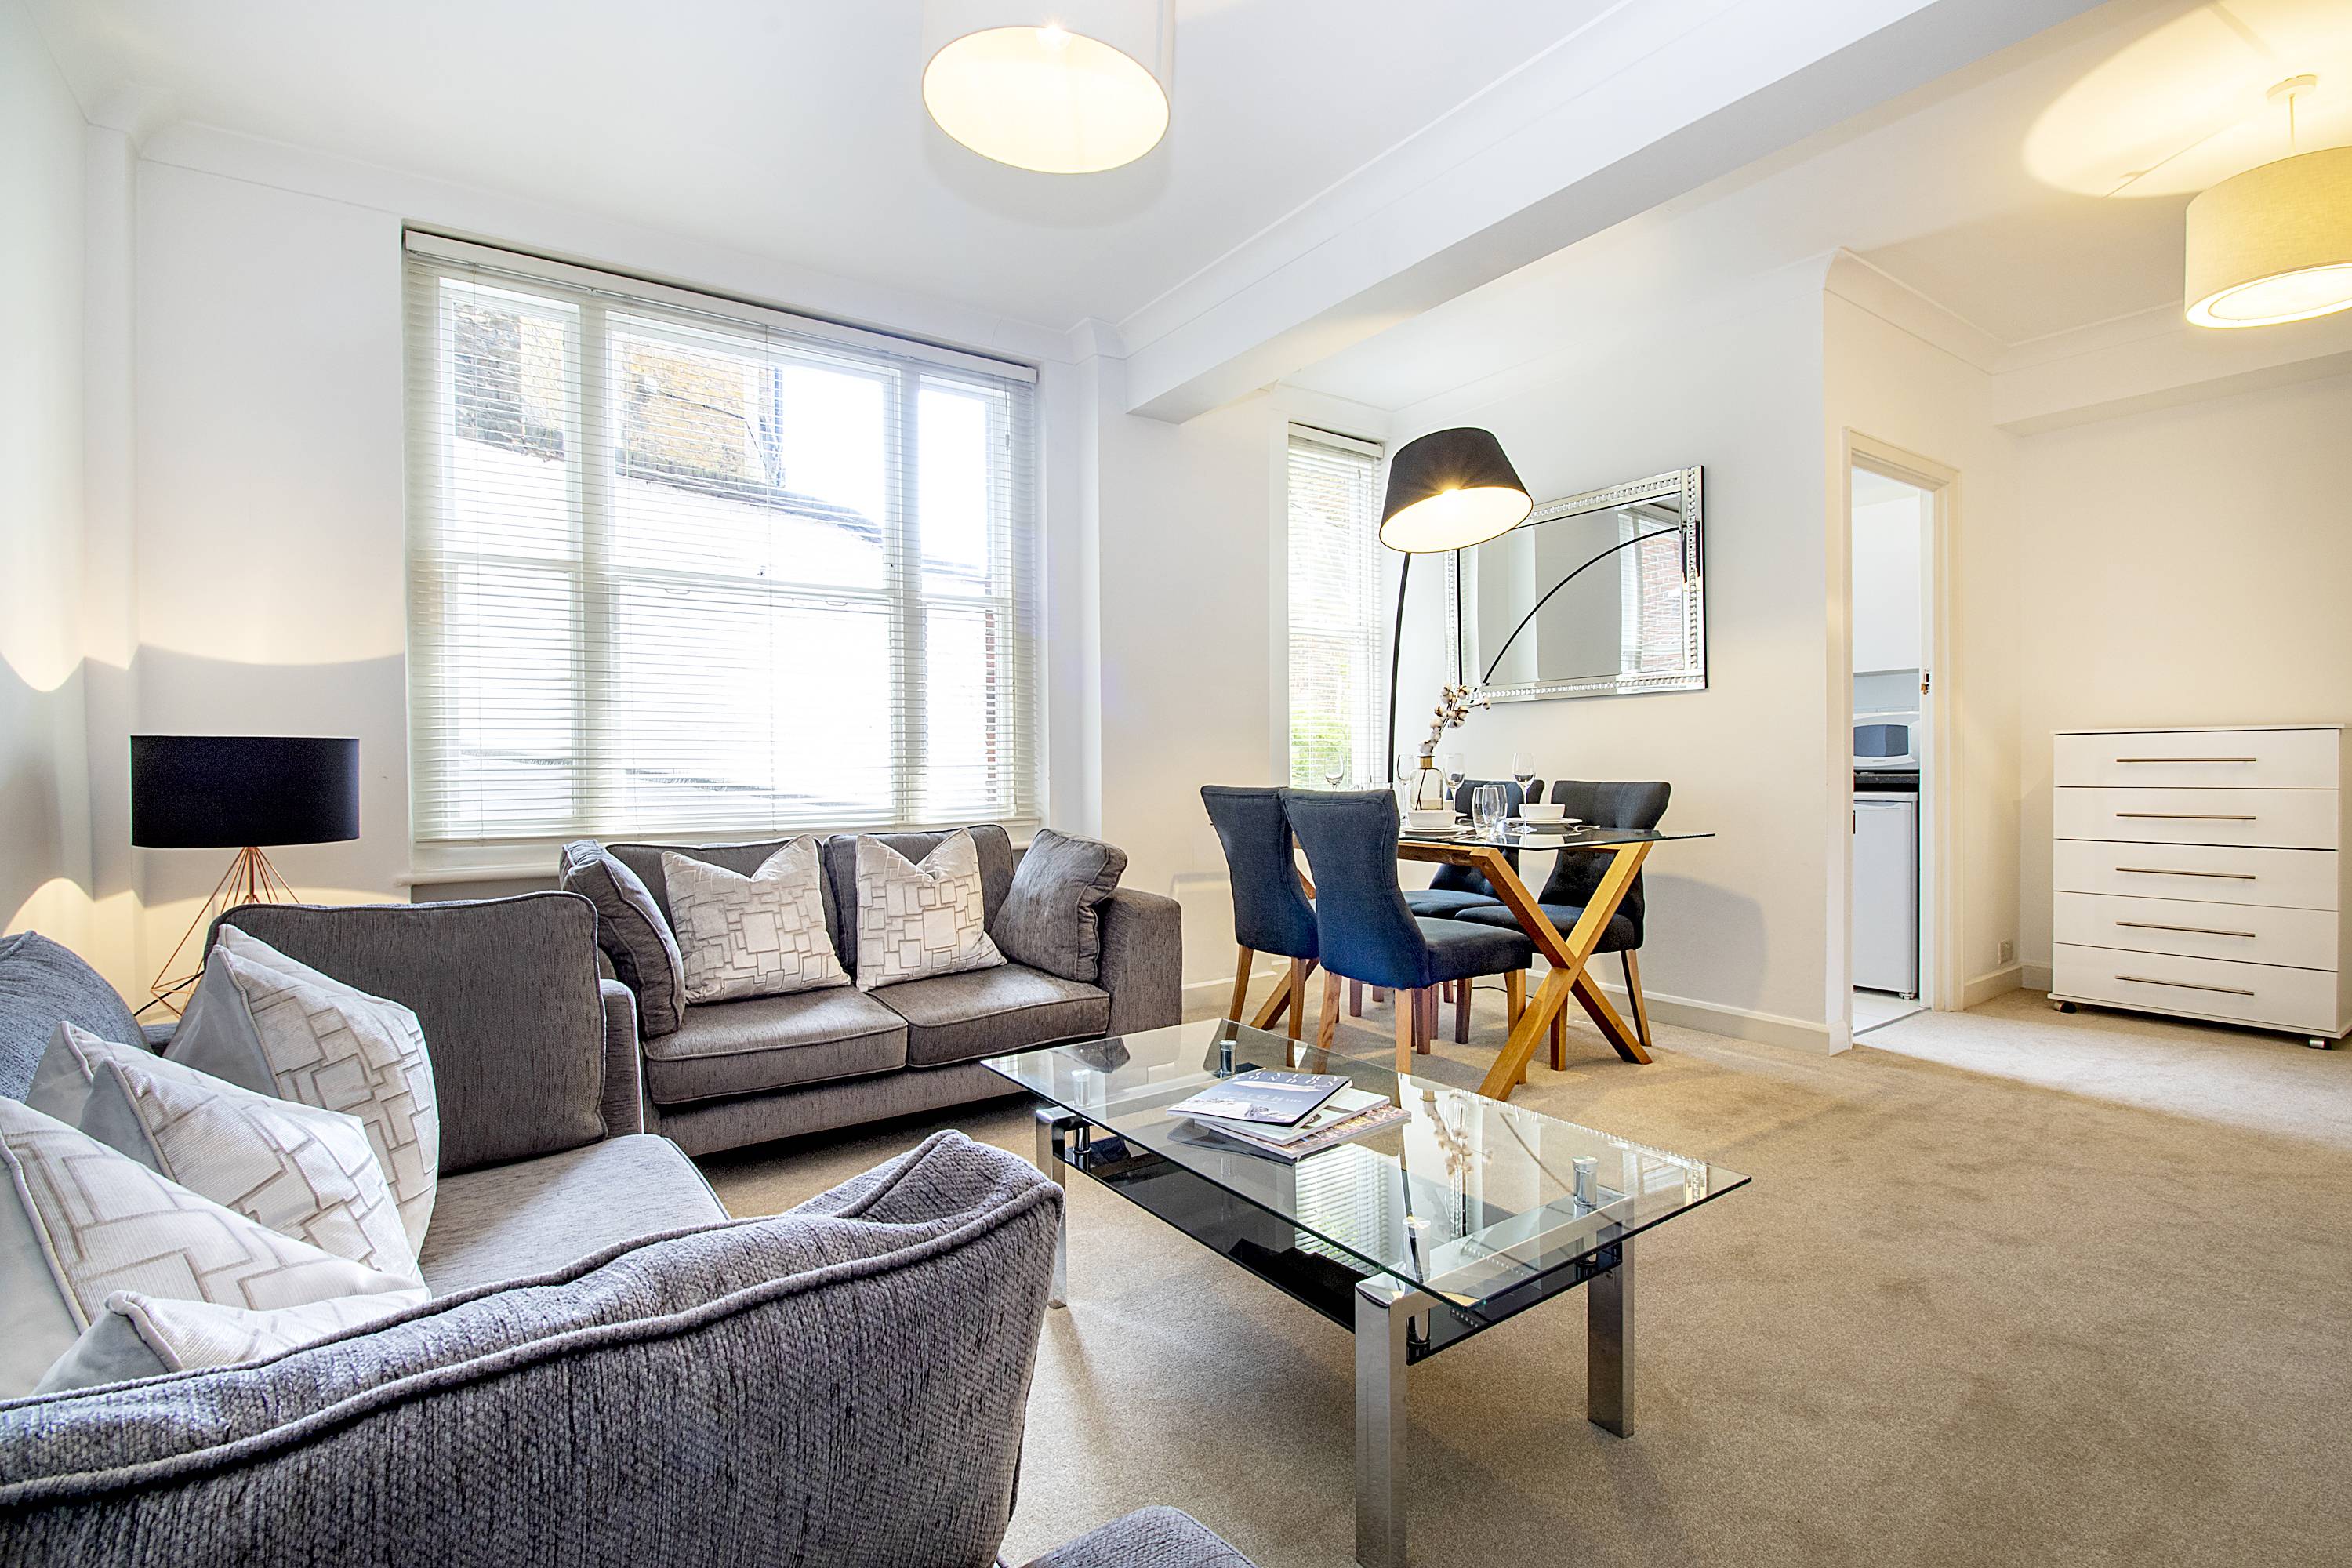 This spacious one bedroom apartment is set in the heart of Mayfair. The apartment comprises a large double bedroom, modern bathroom, spacious living area with views looking over the quiet mews and with access to a private gated communal garden.